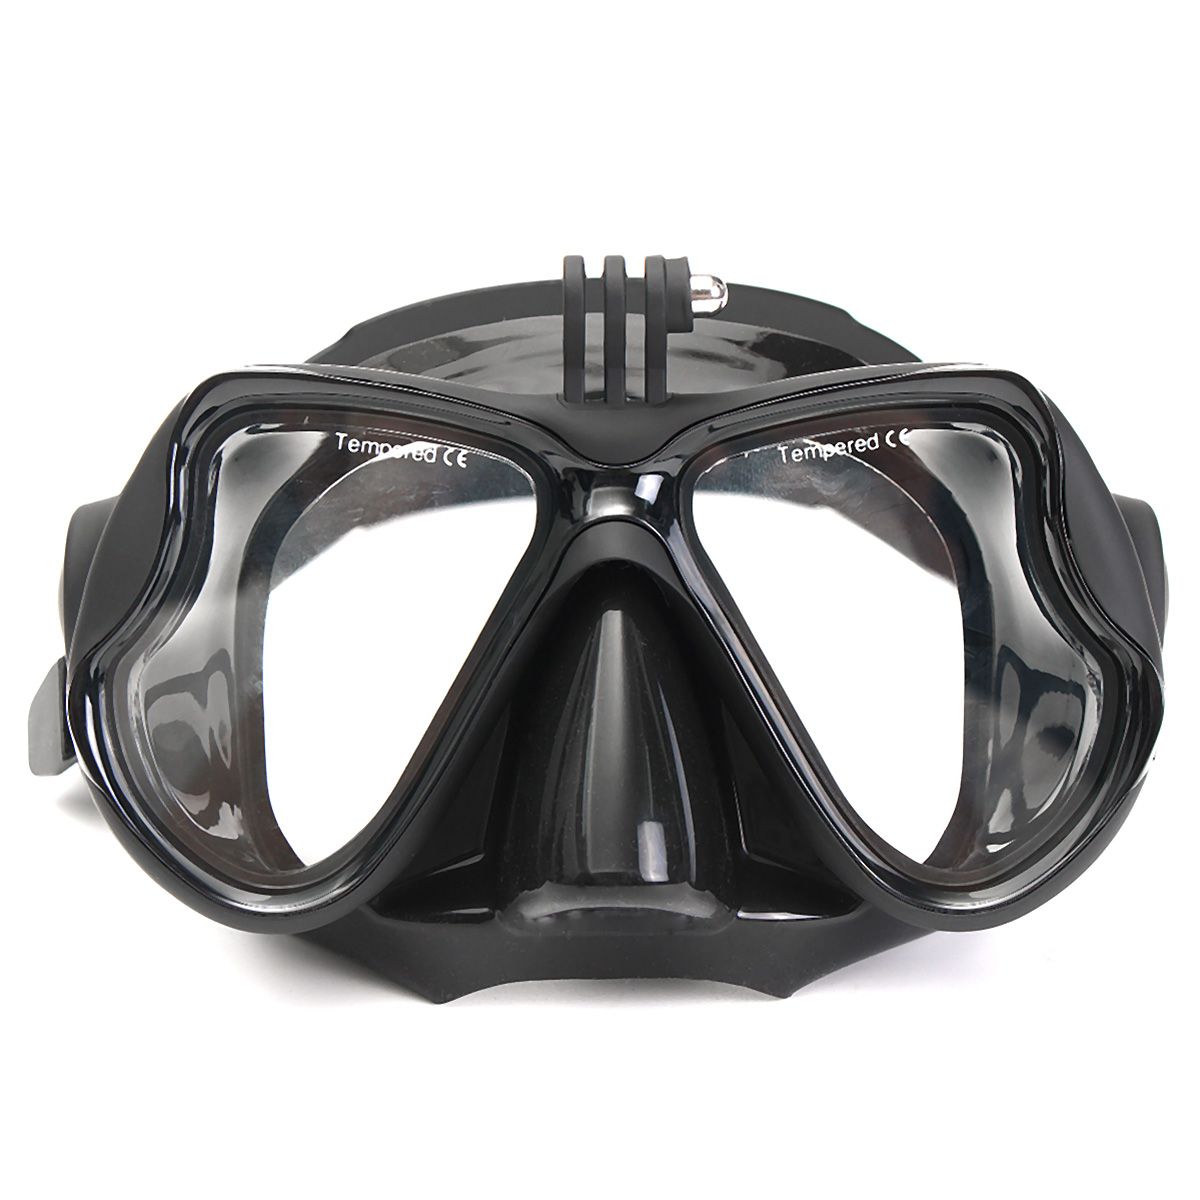 Camera-Mount-Diving-Mask-Oceanic-Scuba-Snorkel-Swimming-Goggles-Glasses-For-GoPro-Action-Camera-1177518